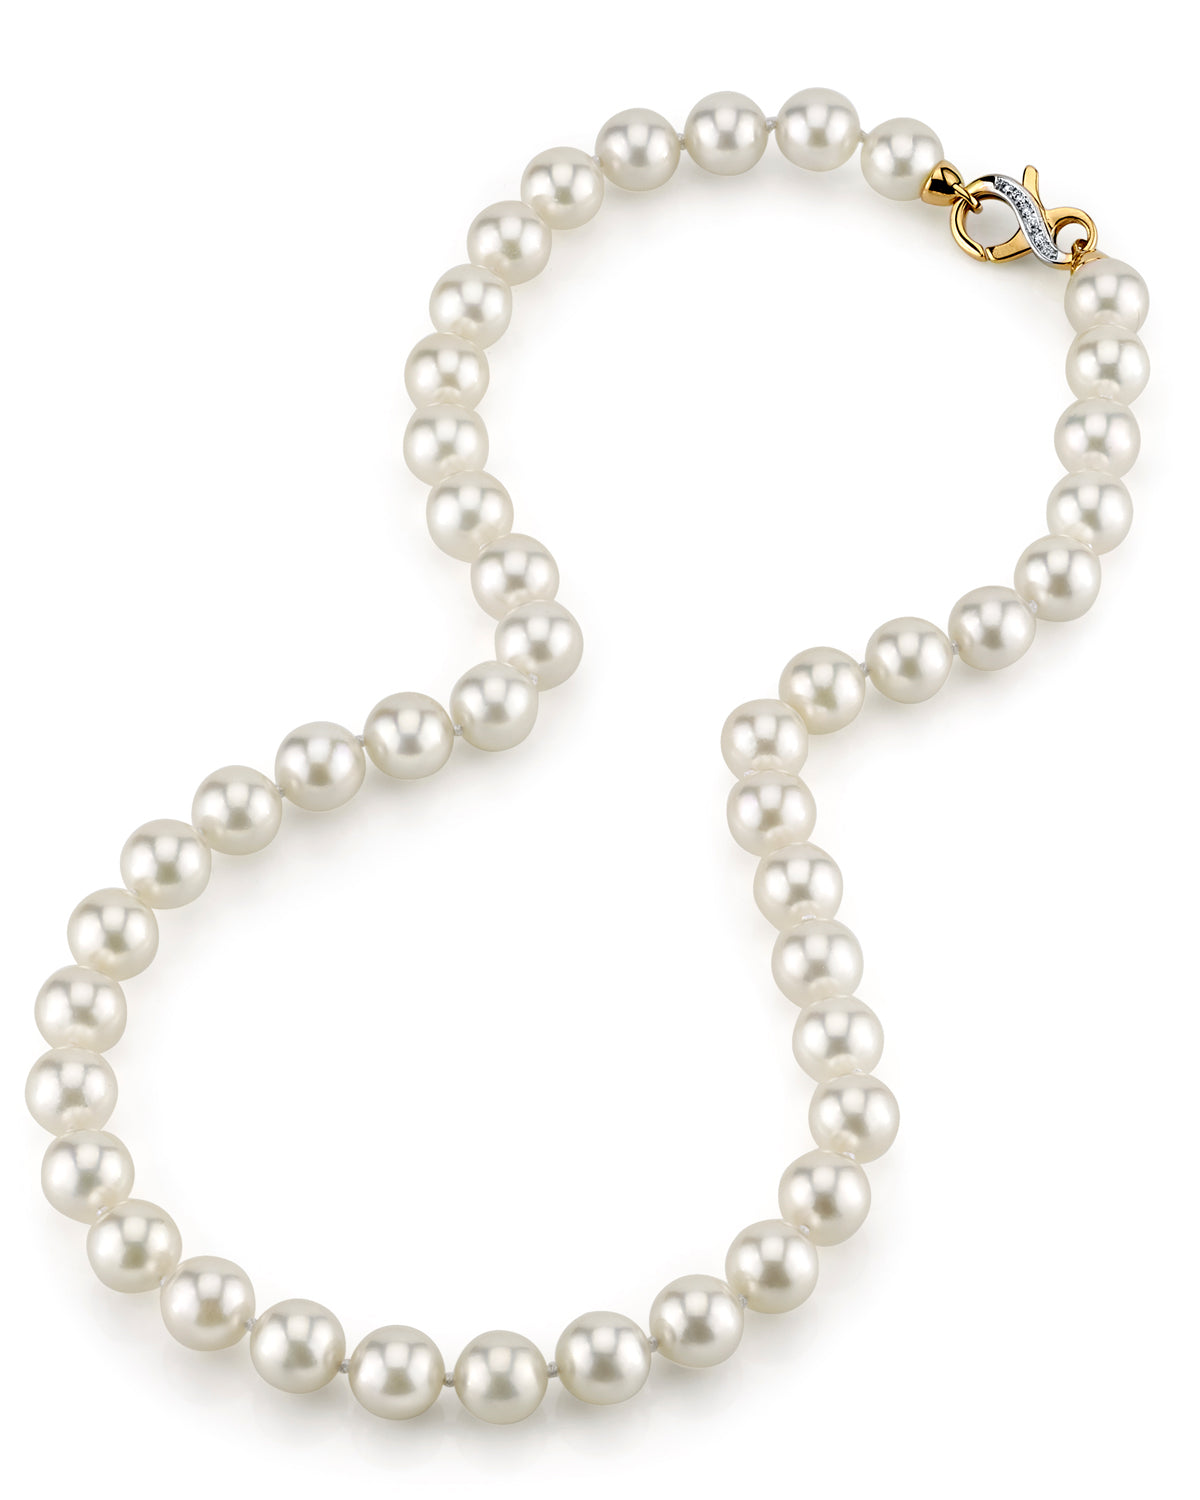 9.0-9.5mm Japanese Akoya White Pearl Necklace- AA+ Quality - Third Image